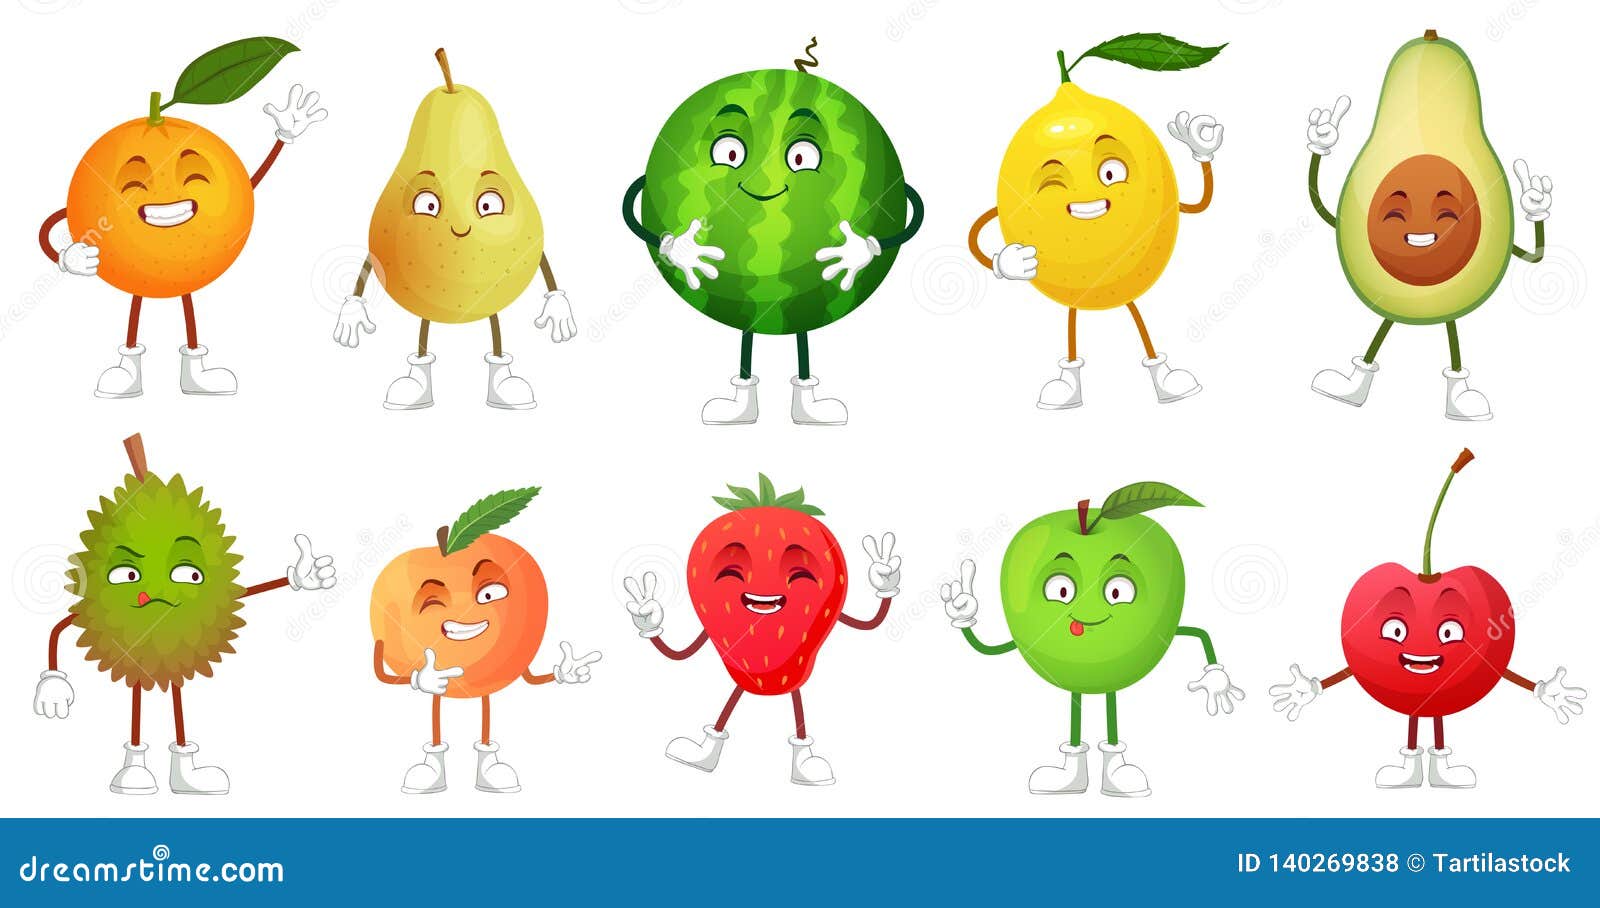 Cartoon Fruit Character. Happy Fruits Mascot Funny Durian, Smiling Apple  and Pear. Healthy Fresh Food Vector Stock Vector - Illustration of green,  funny: 140269838